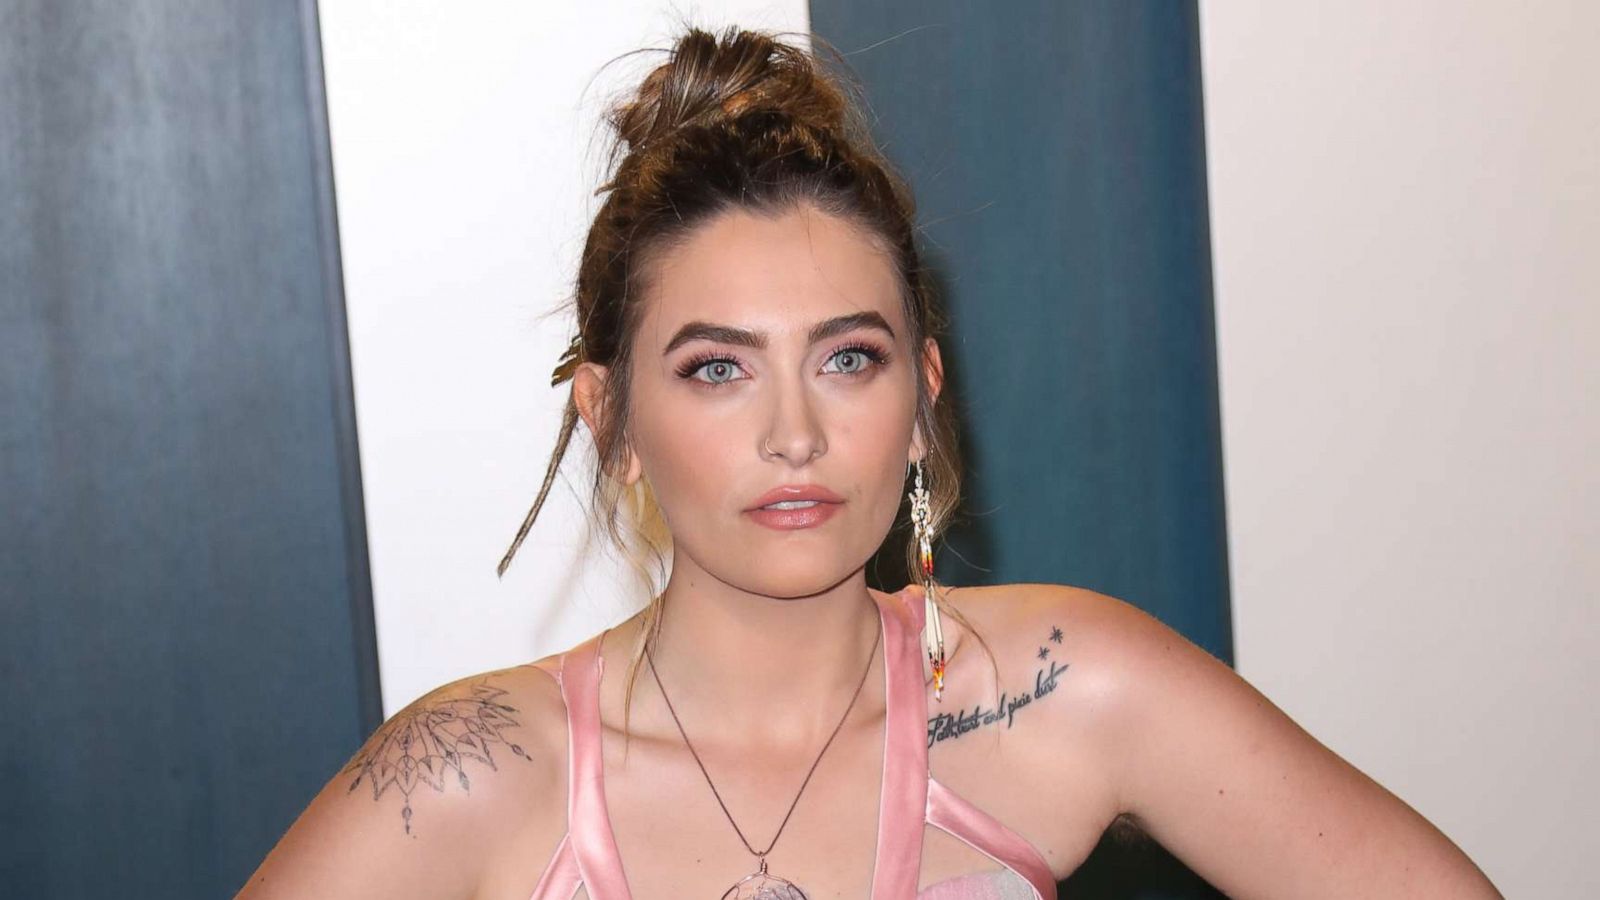 Paris Jackson Sex Porn - Paris Jackson opens up about her sexuality and her late father's support:  'My dad caught on pretty quick' - Good Morning America